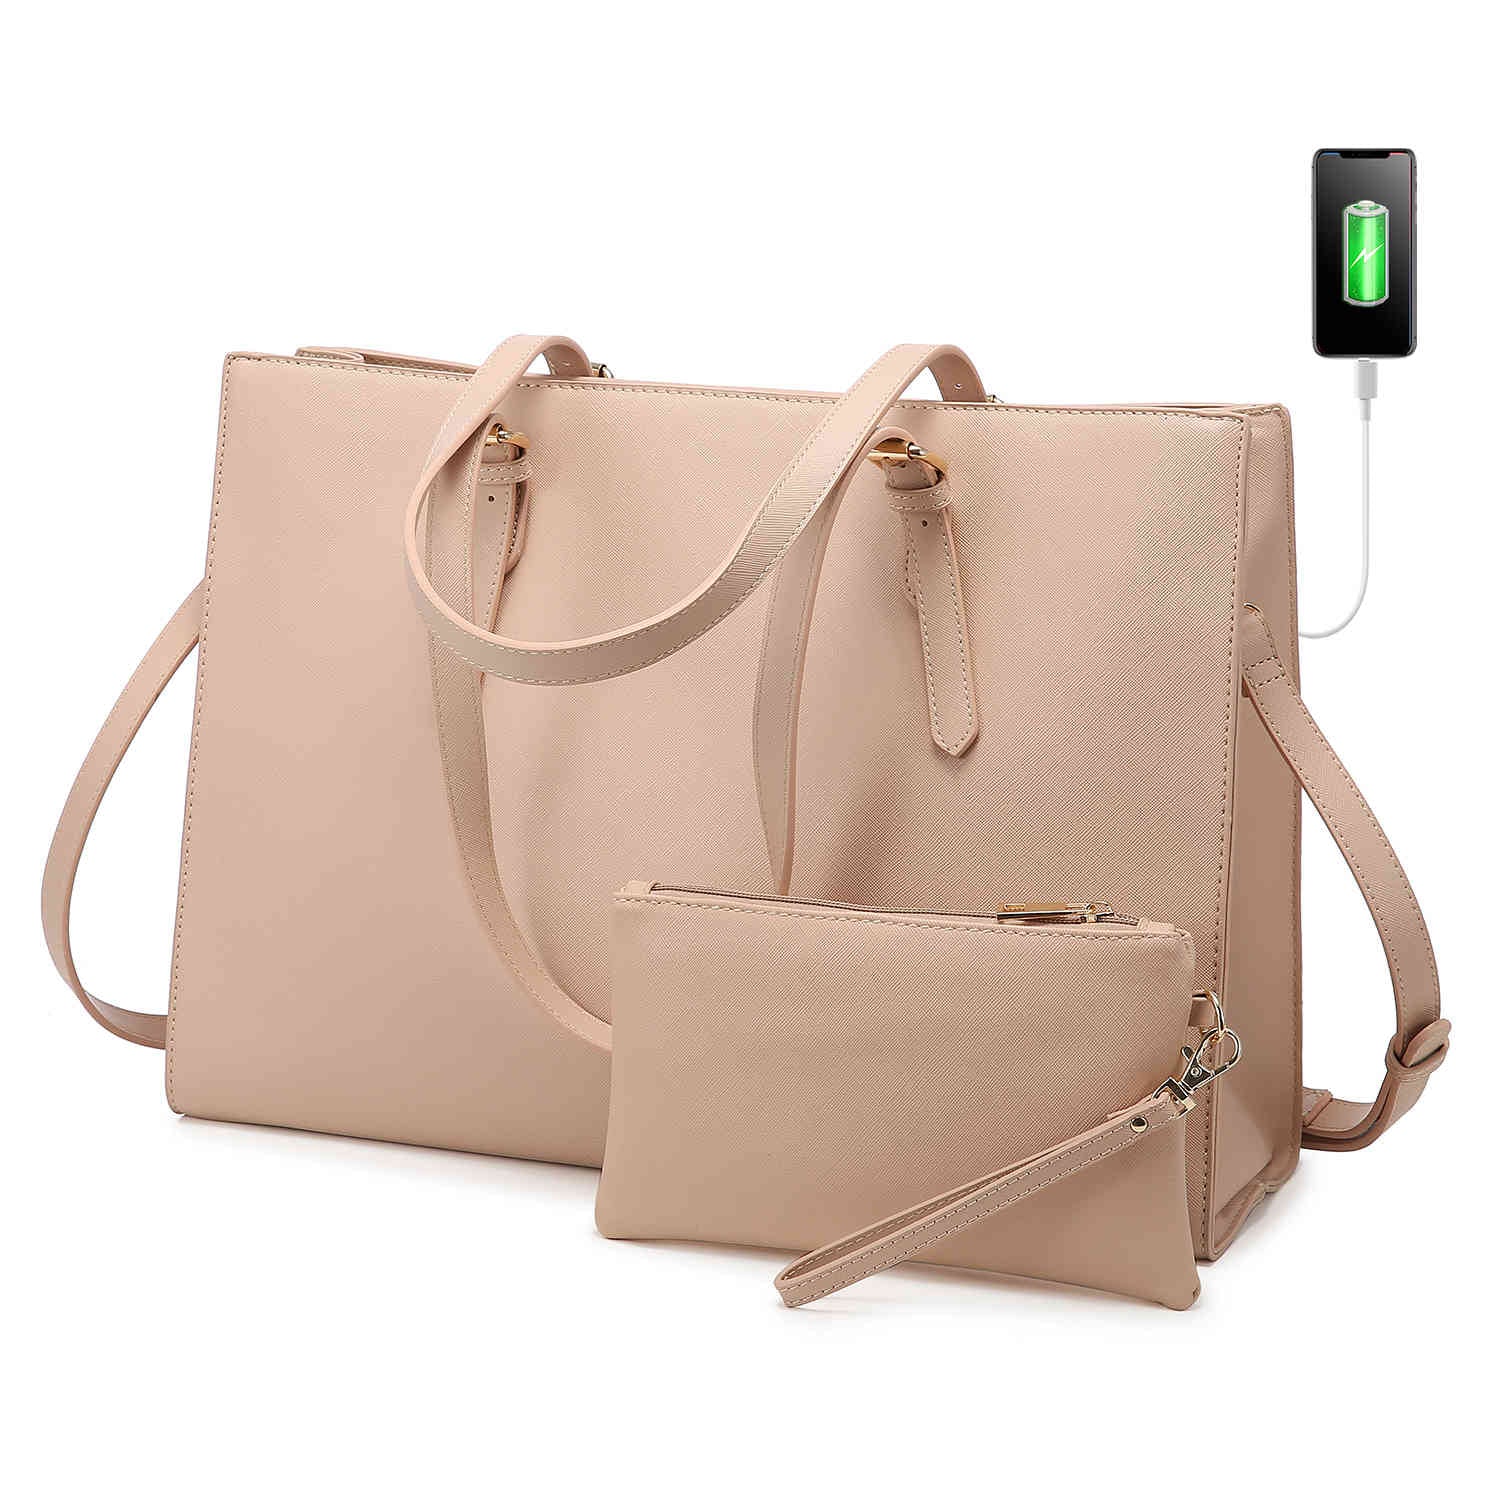 The Lovevook Handbag Set is stylish, functional — and on sale